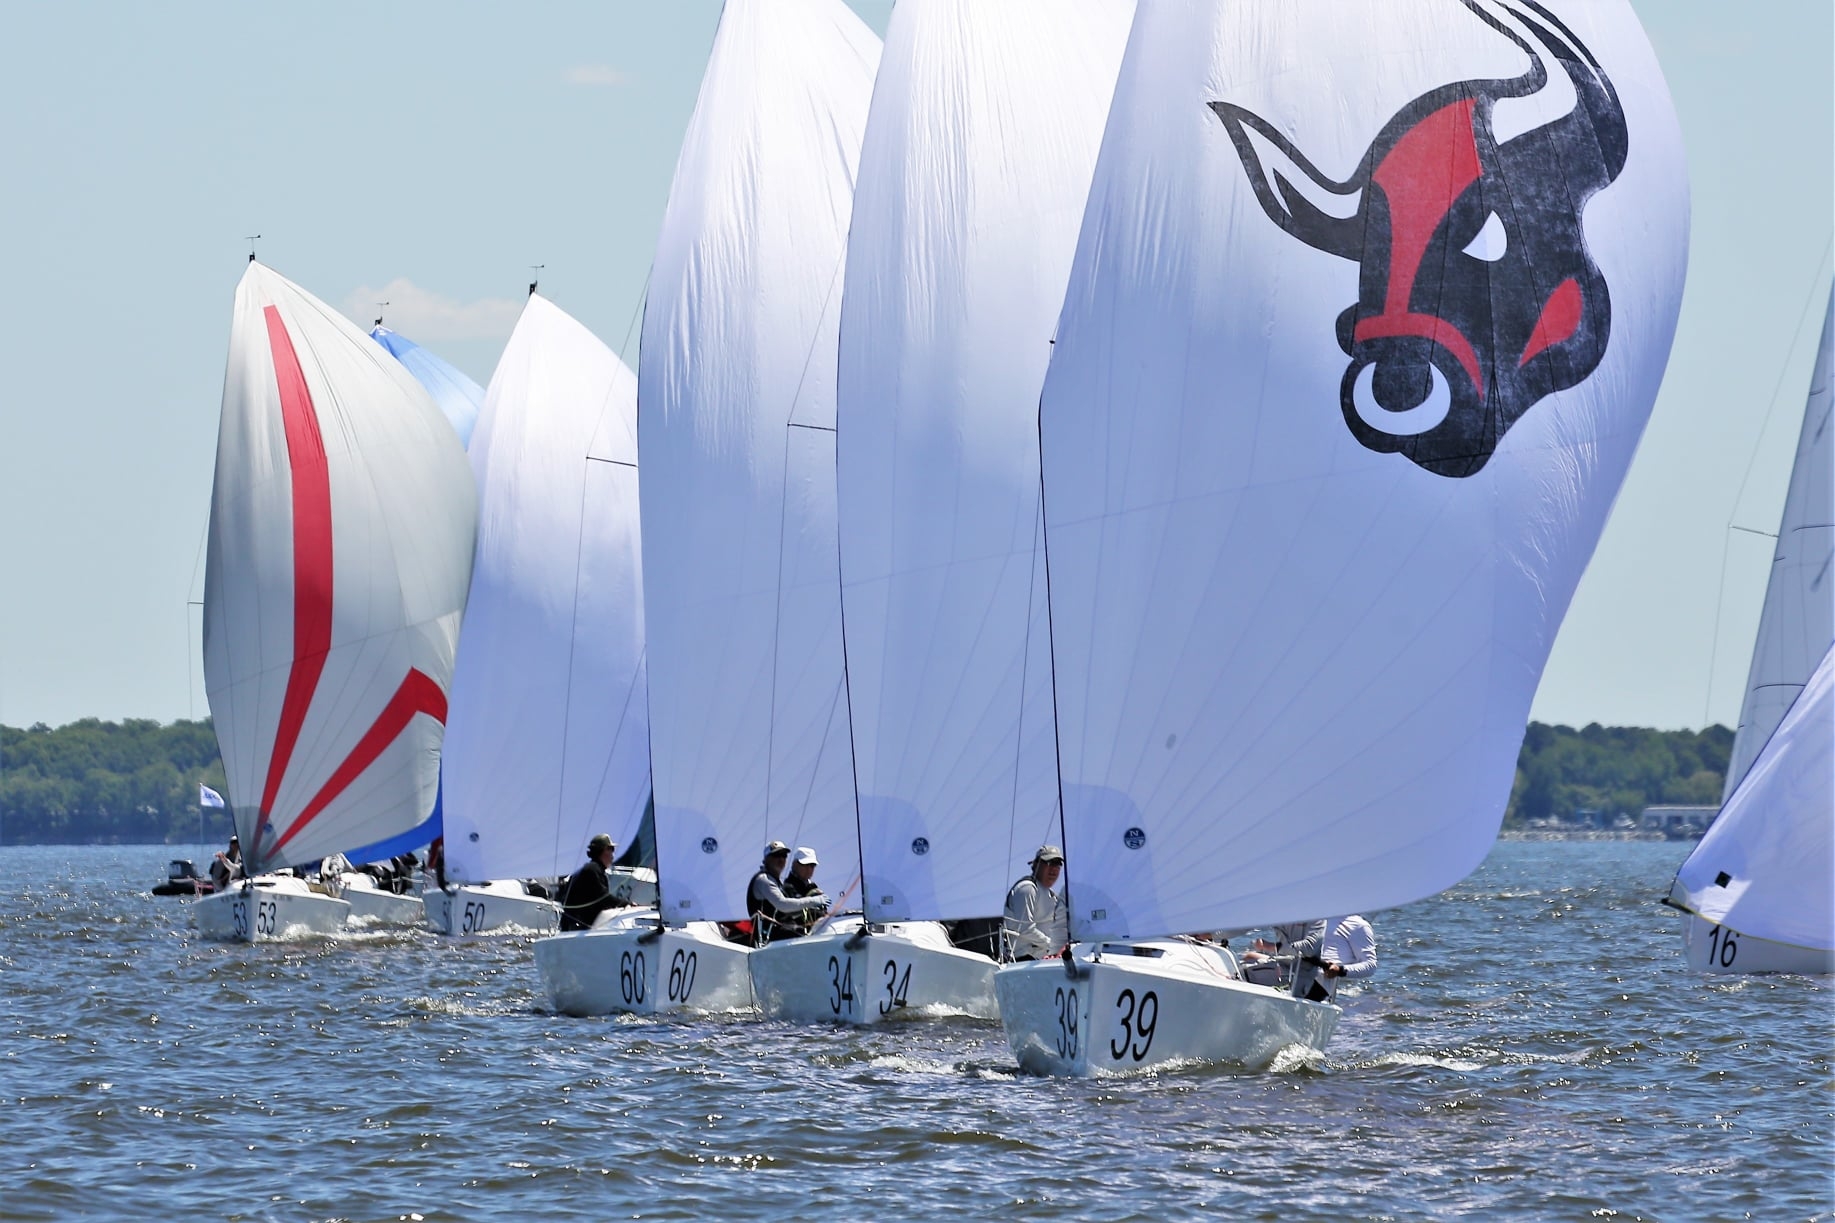  J/70  2021 North American Championship  Annapolis MD  Day 1  two valid starts, no successful finishes